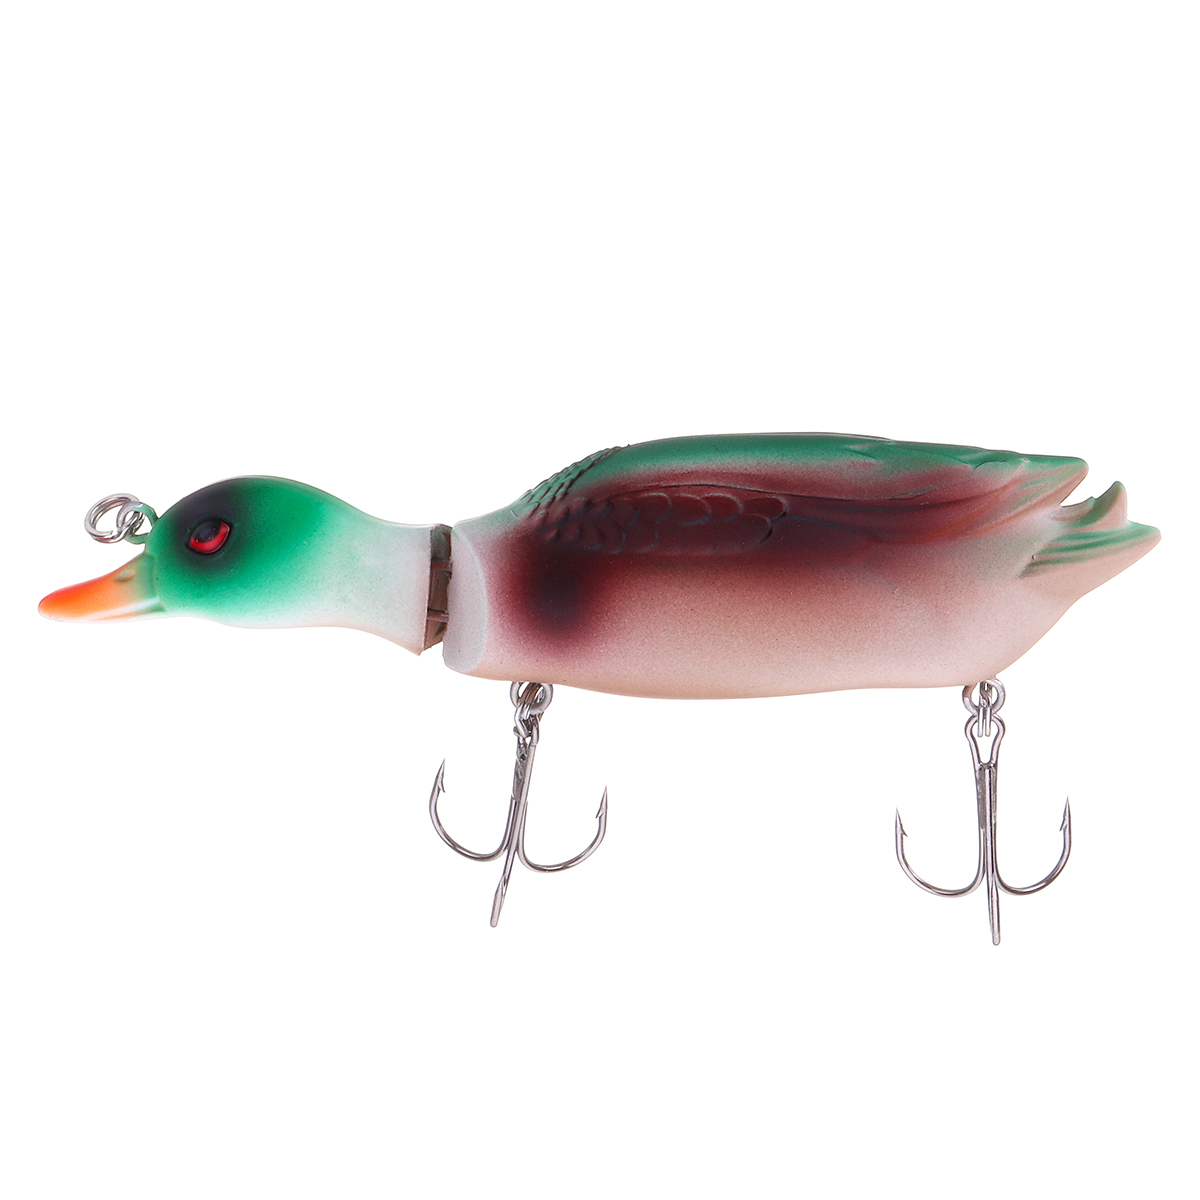 1PC-ZANLURE-5-13CM-59g-3D-Duck-Artificial-Fishing-Lure-With-Hooks--Hard-Baits-Minnow-Topwater-Wobble-1646056-6